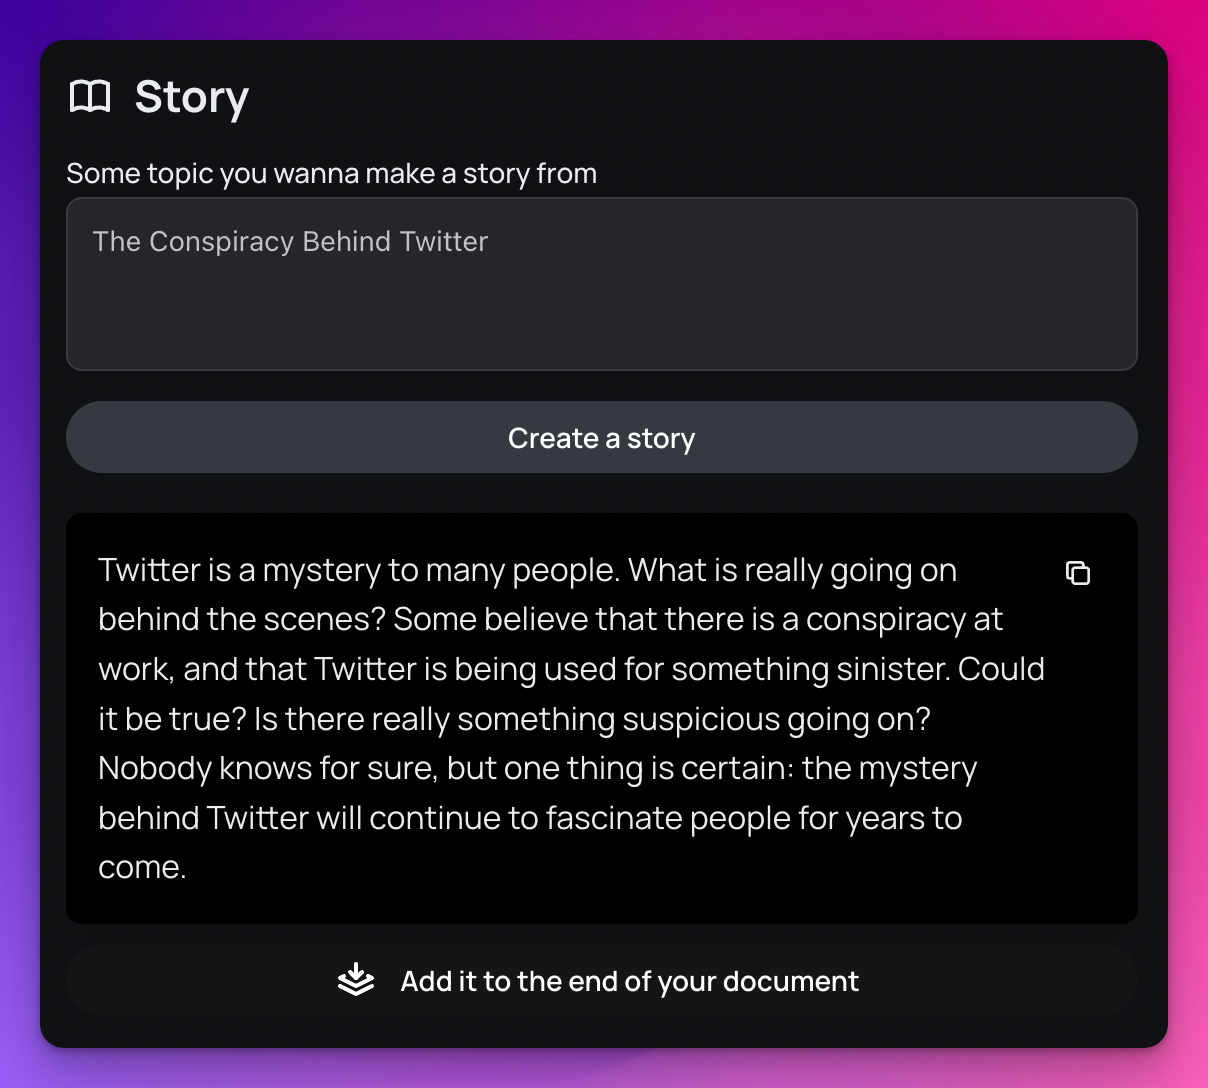 Generate a story